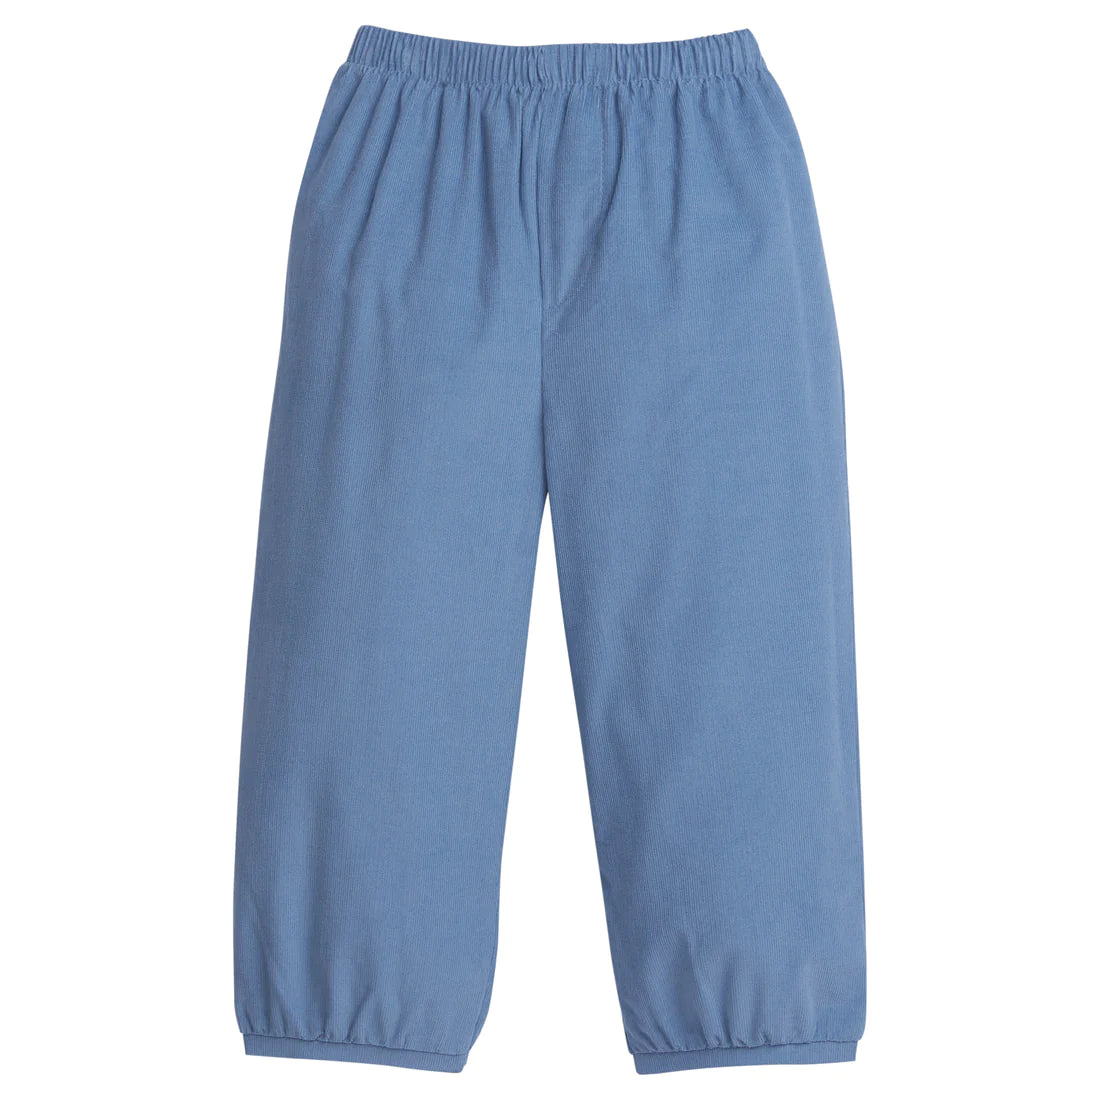 Stormy Blue Corduroy Pull On Pant